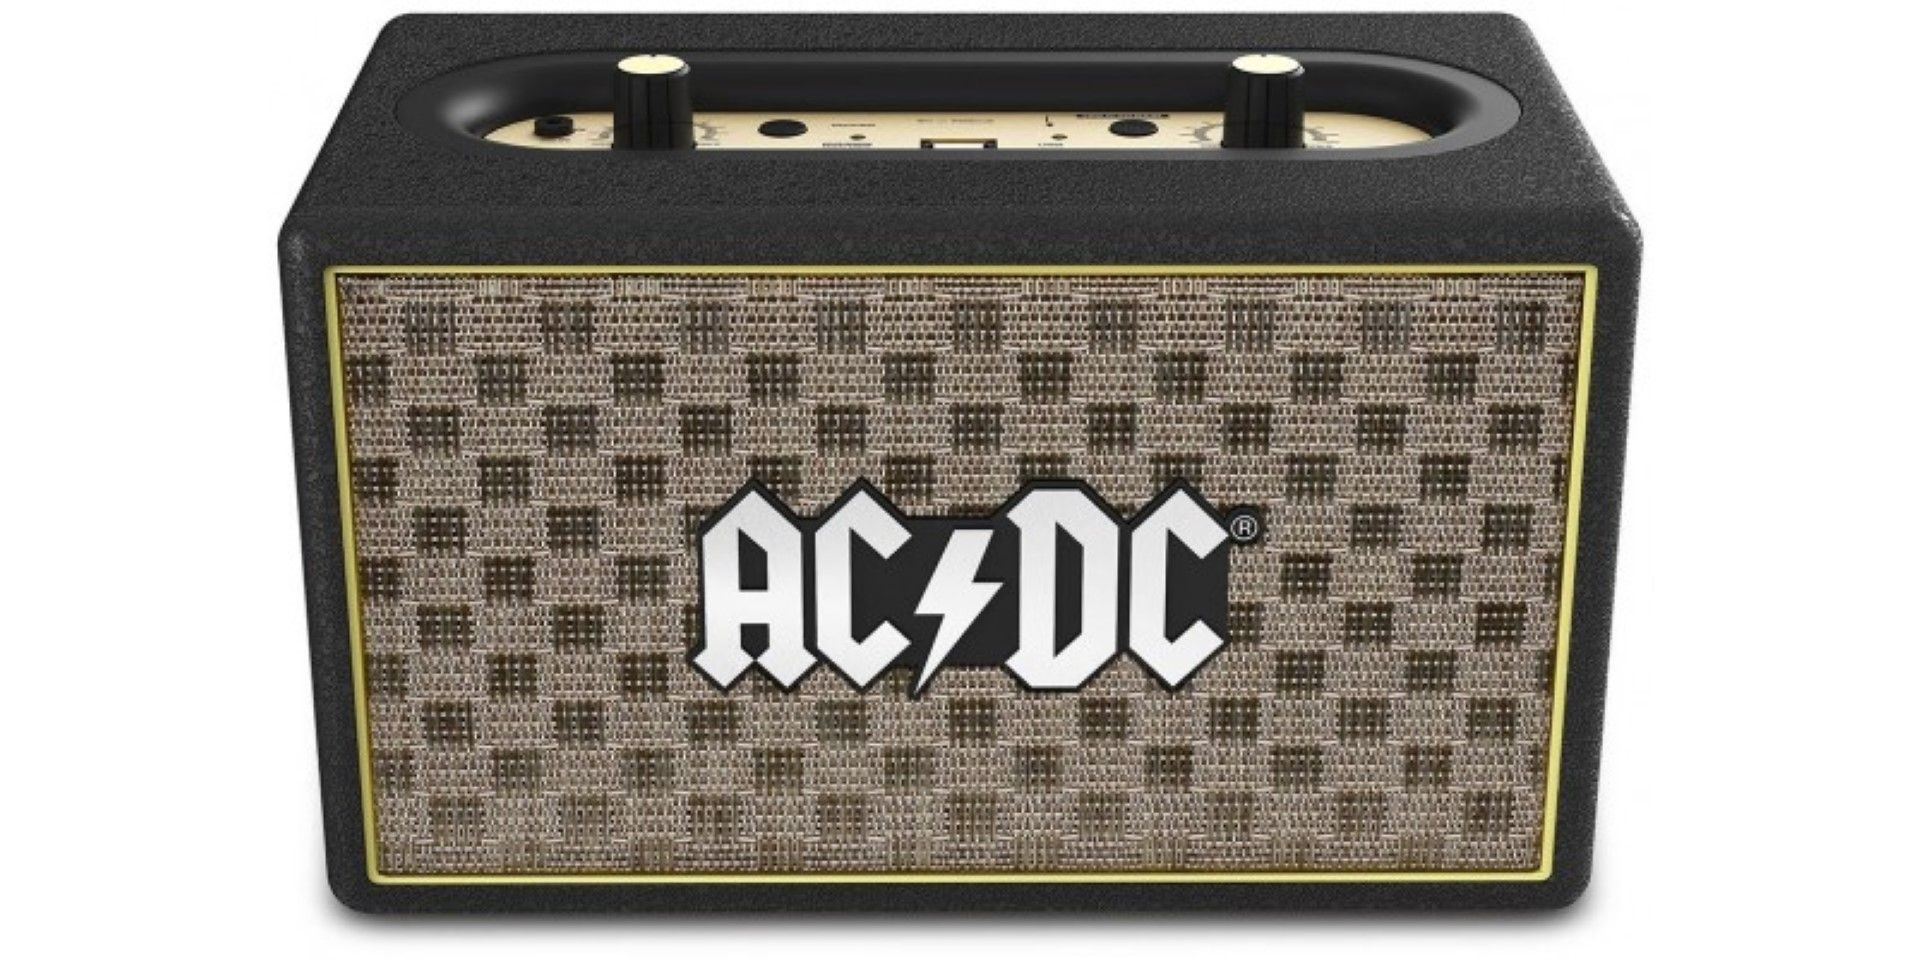 1 x iDance ACDC Vintage Amp Style Classic 2 Bluetooth Speaker - 50W Power - USB/MP3 Playback or - Image 4 of 4